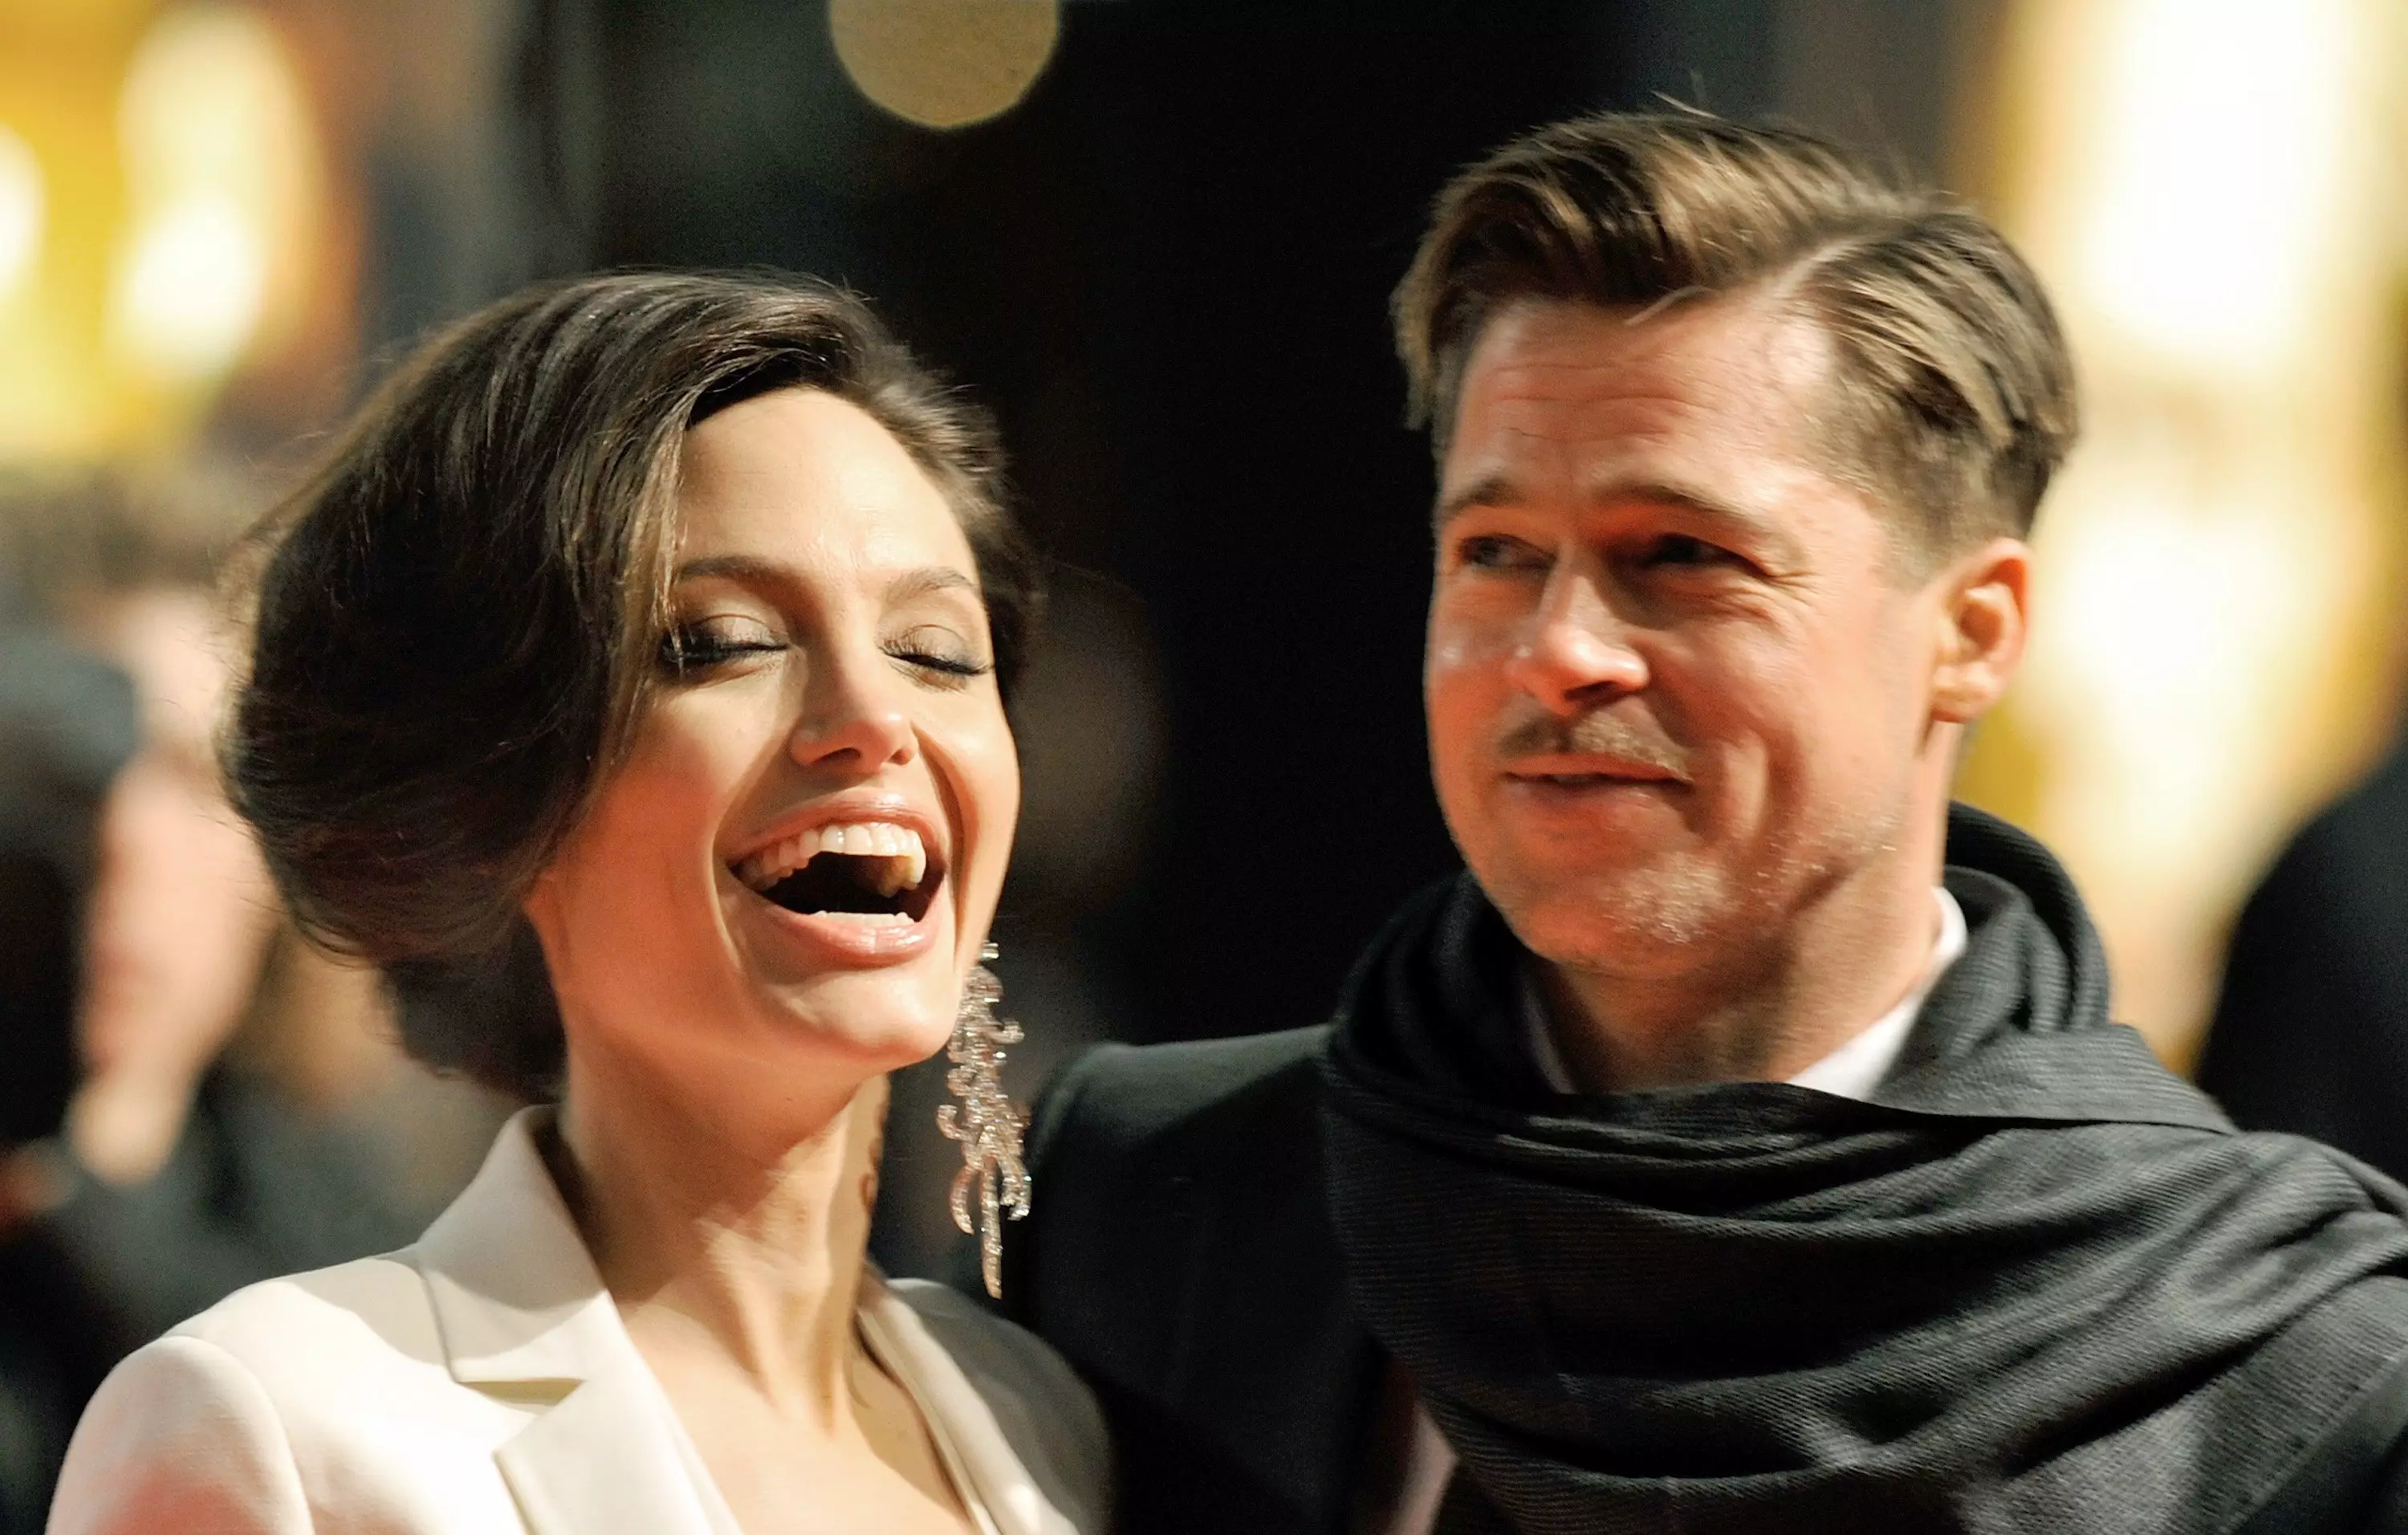 Brad Pitt admits he spent 18 months in Alcoholics Anonymous after split with Angelina Jolie.